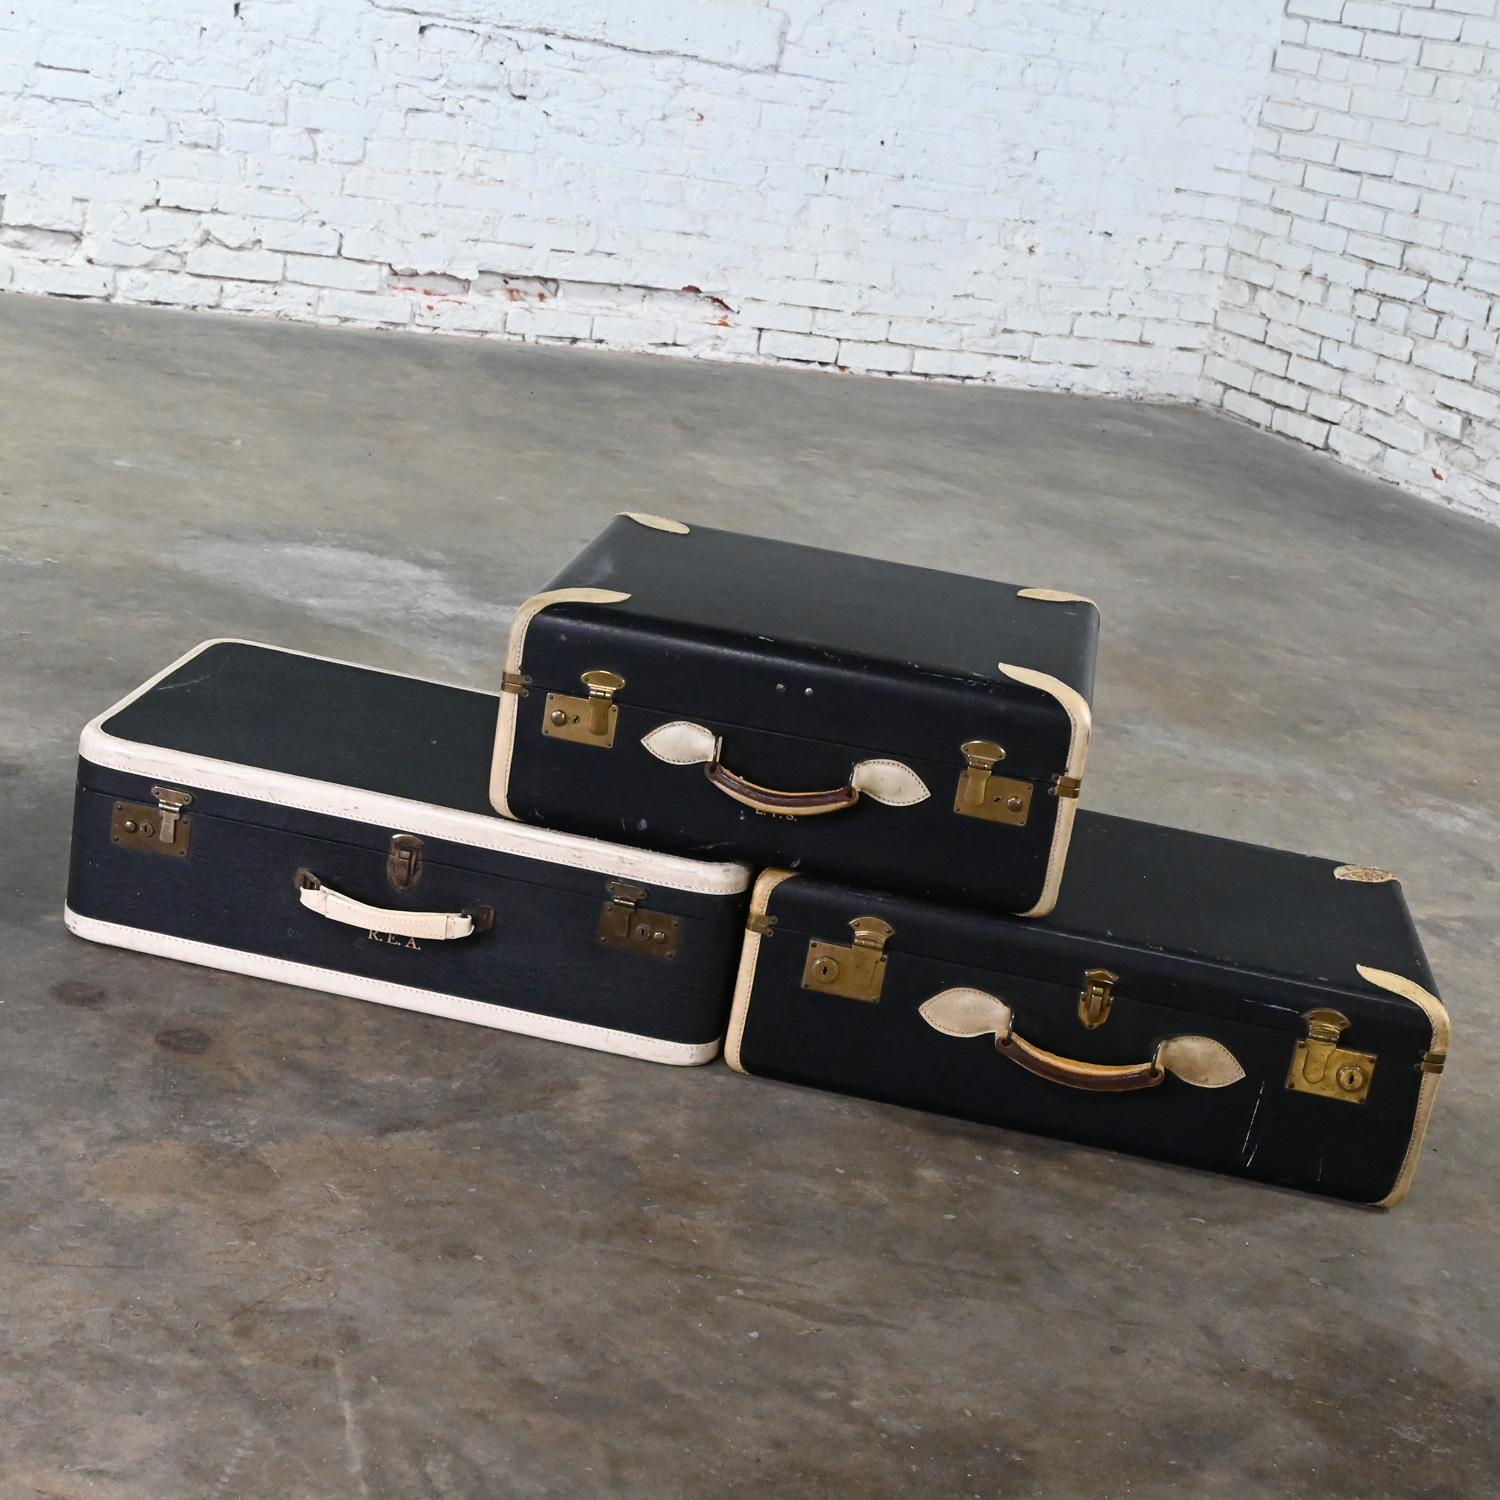 Mid Century Boho Chic Luggage End or Side Tables or Décor Black & White 3 Pieces 5